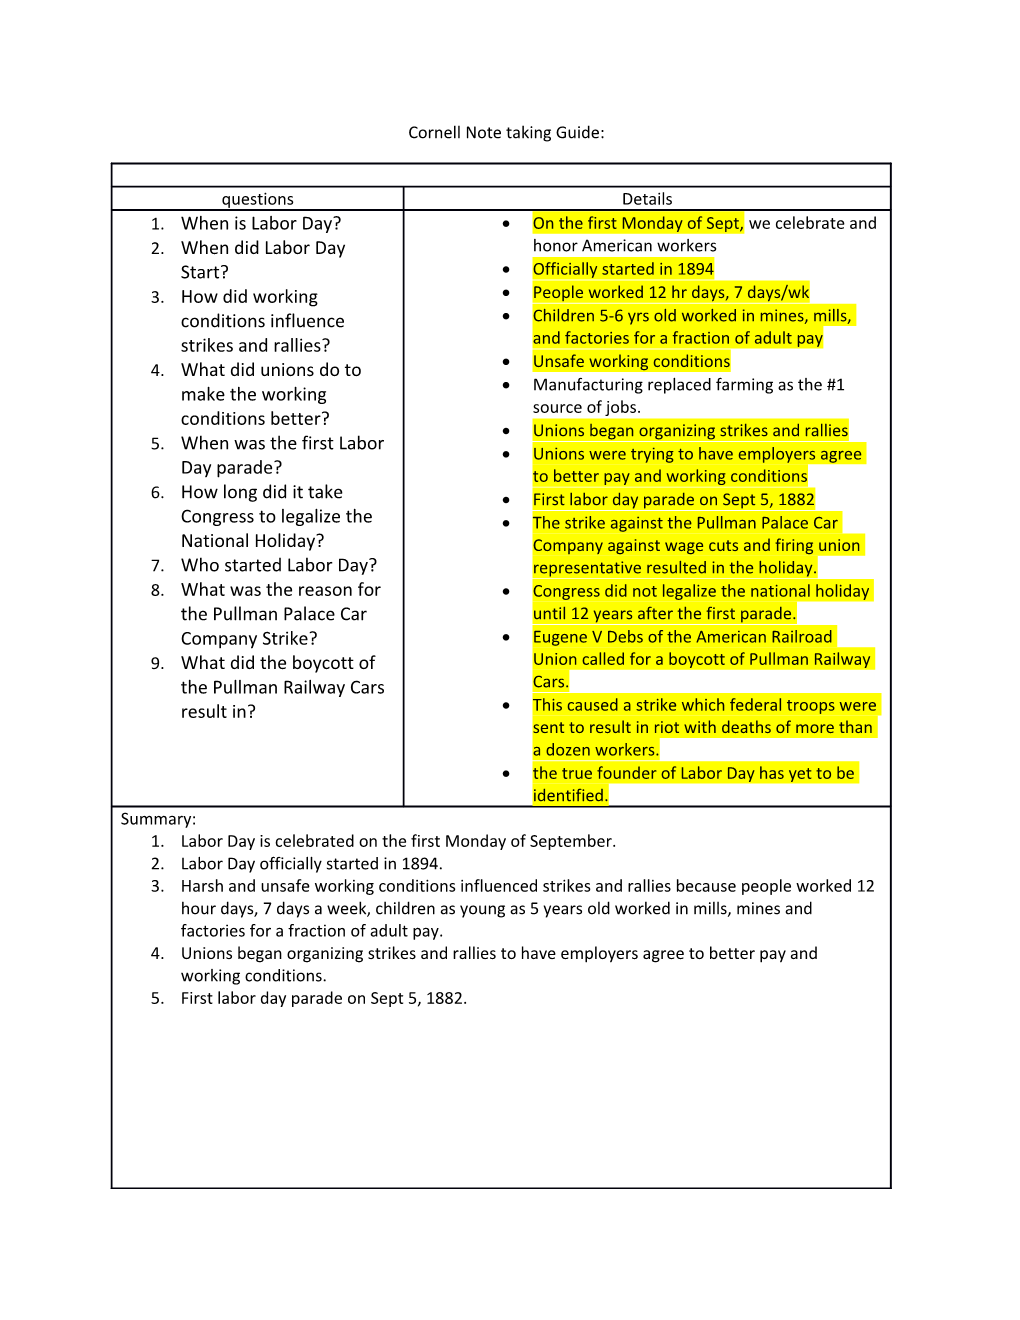 Cornell Note Taking Guide